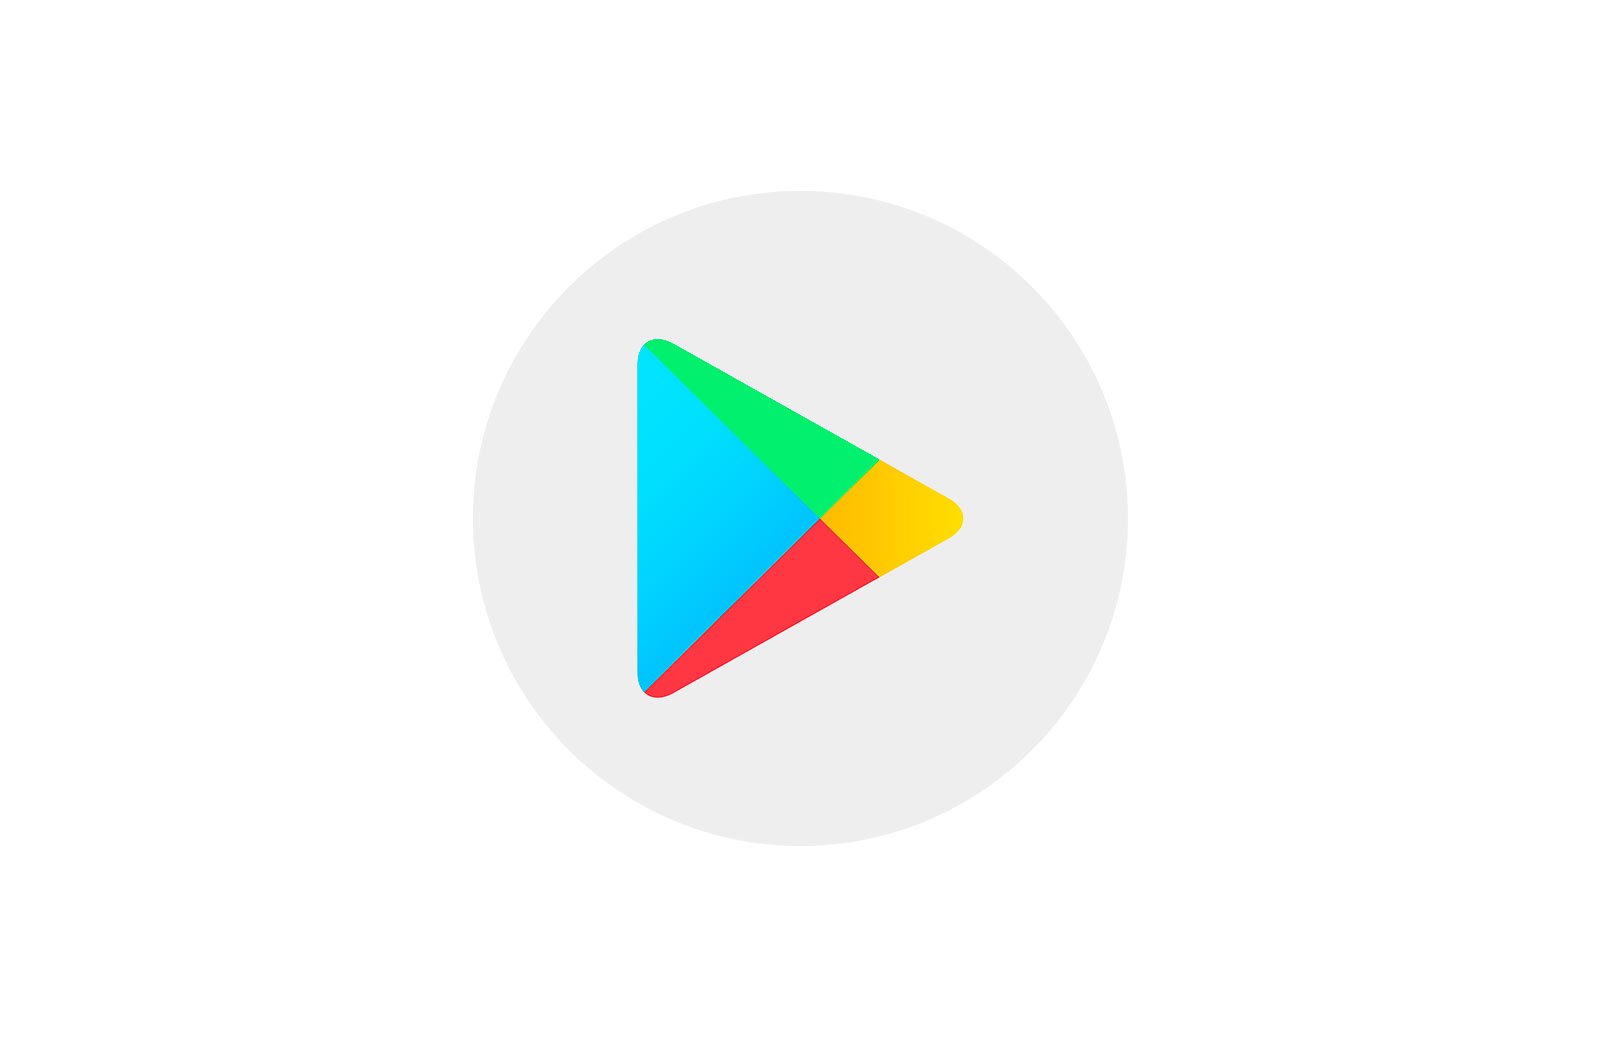 Uninstalling Google Play Services on Meizu mobile phones